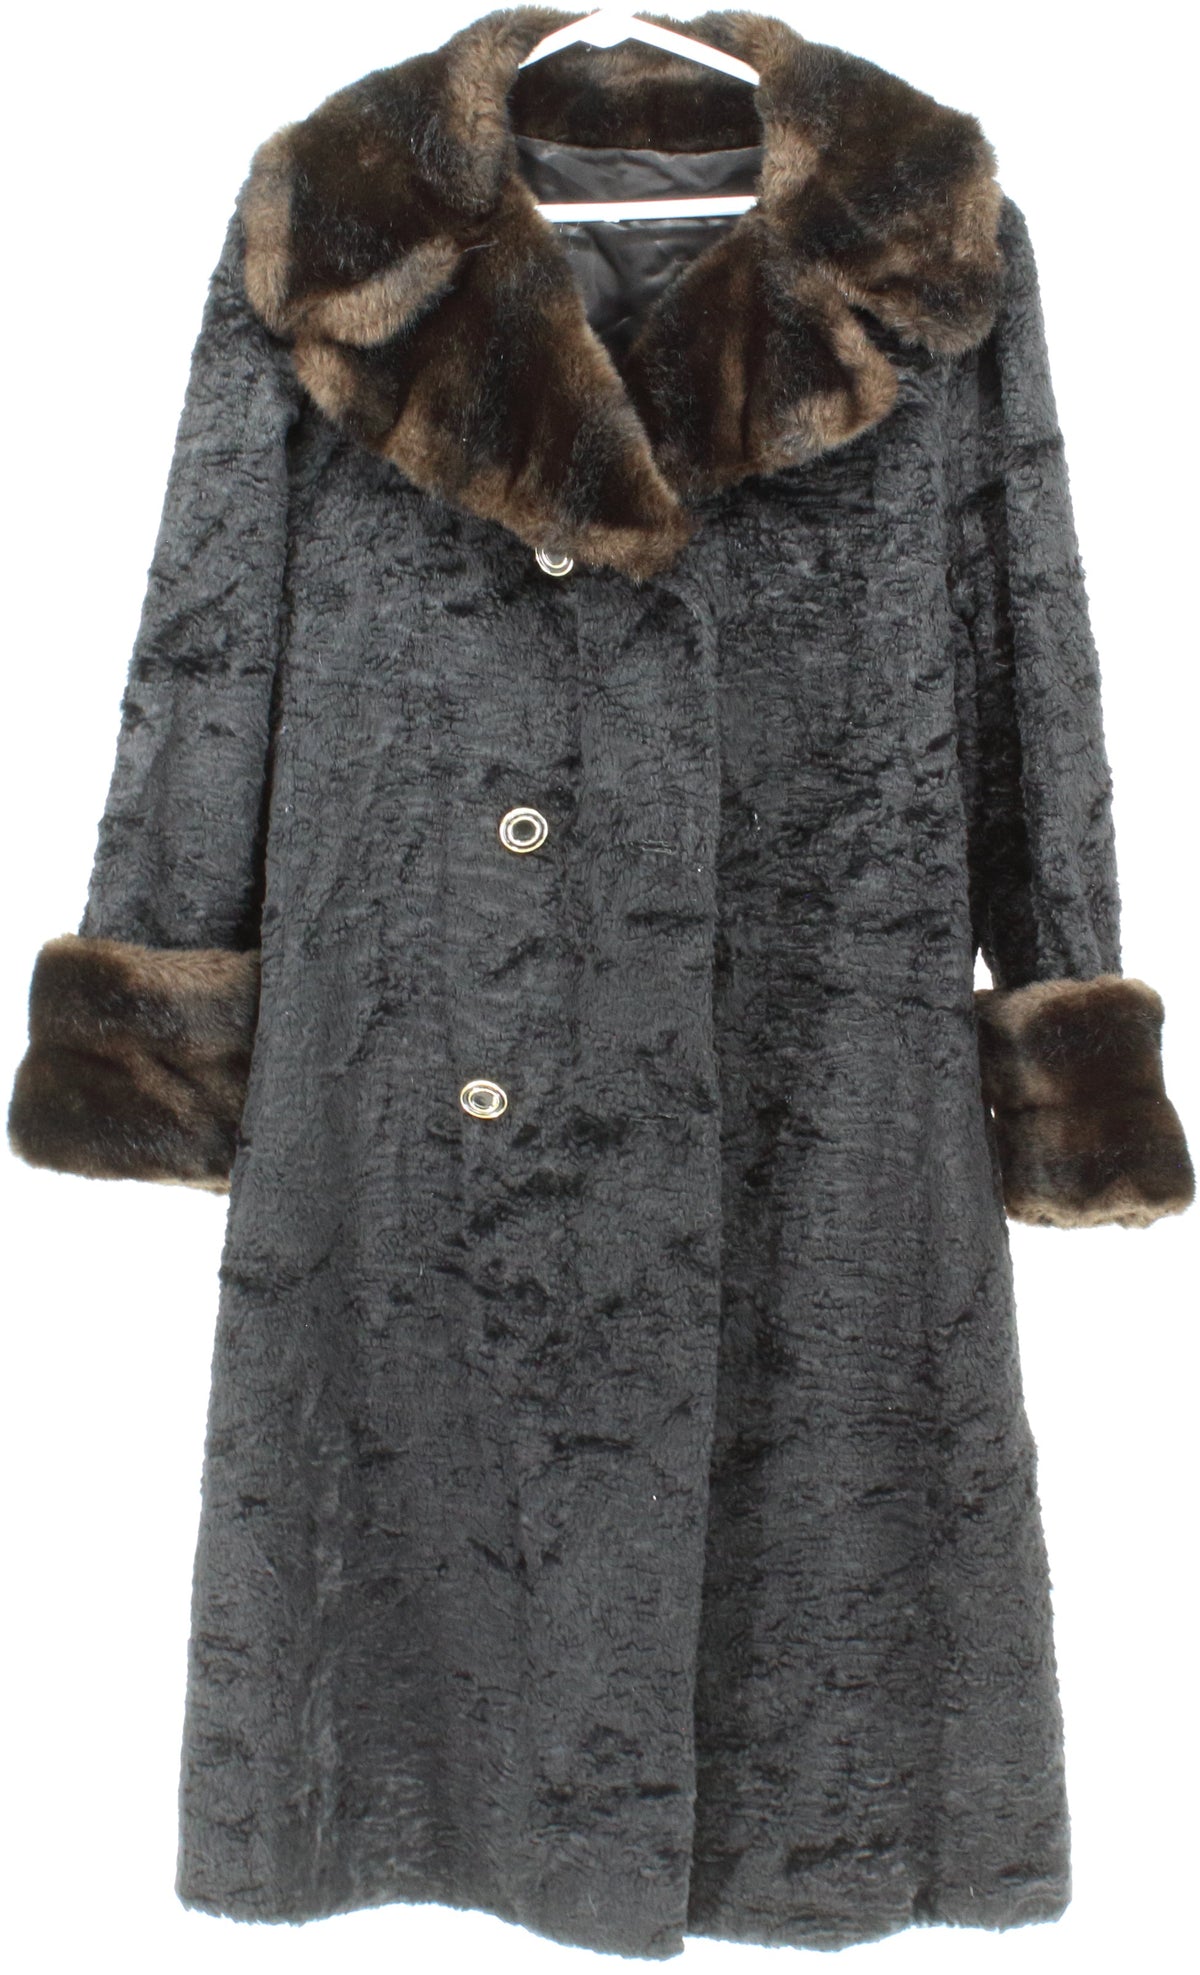 Sycamore Black Faux Fur Women's Coat With Brown Collar and Cuffs